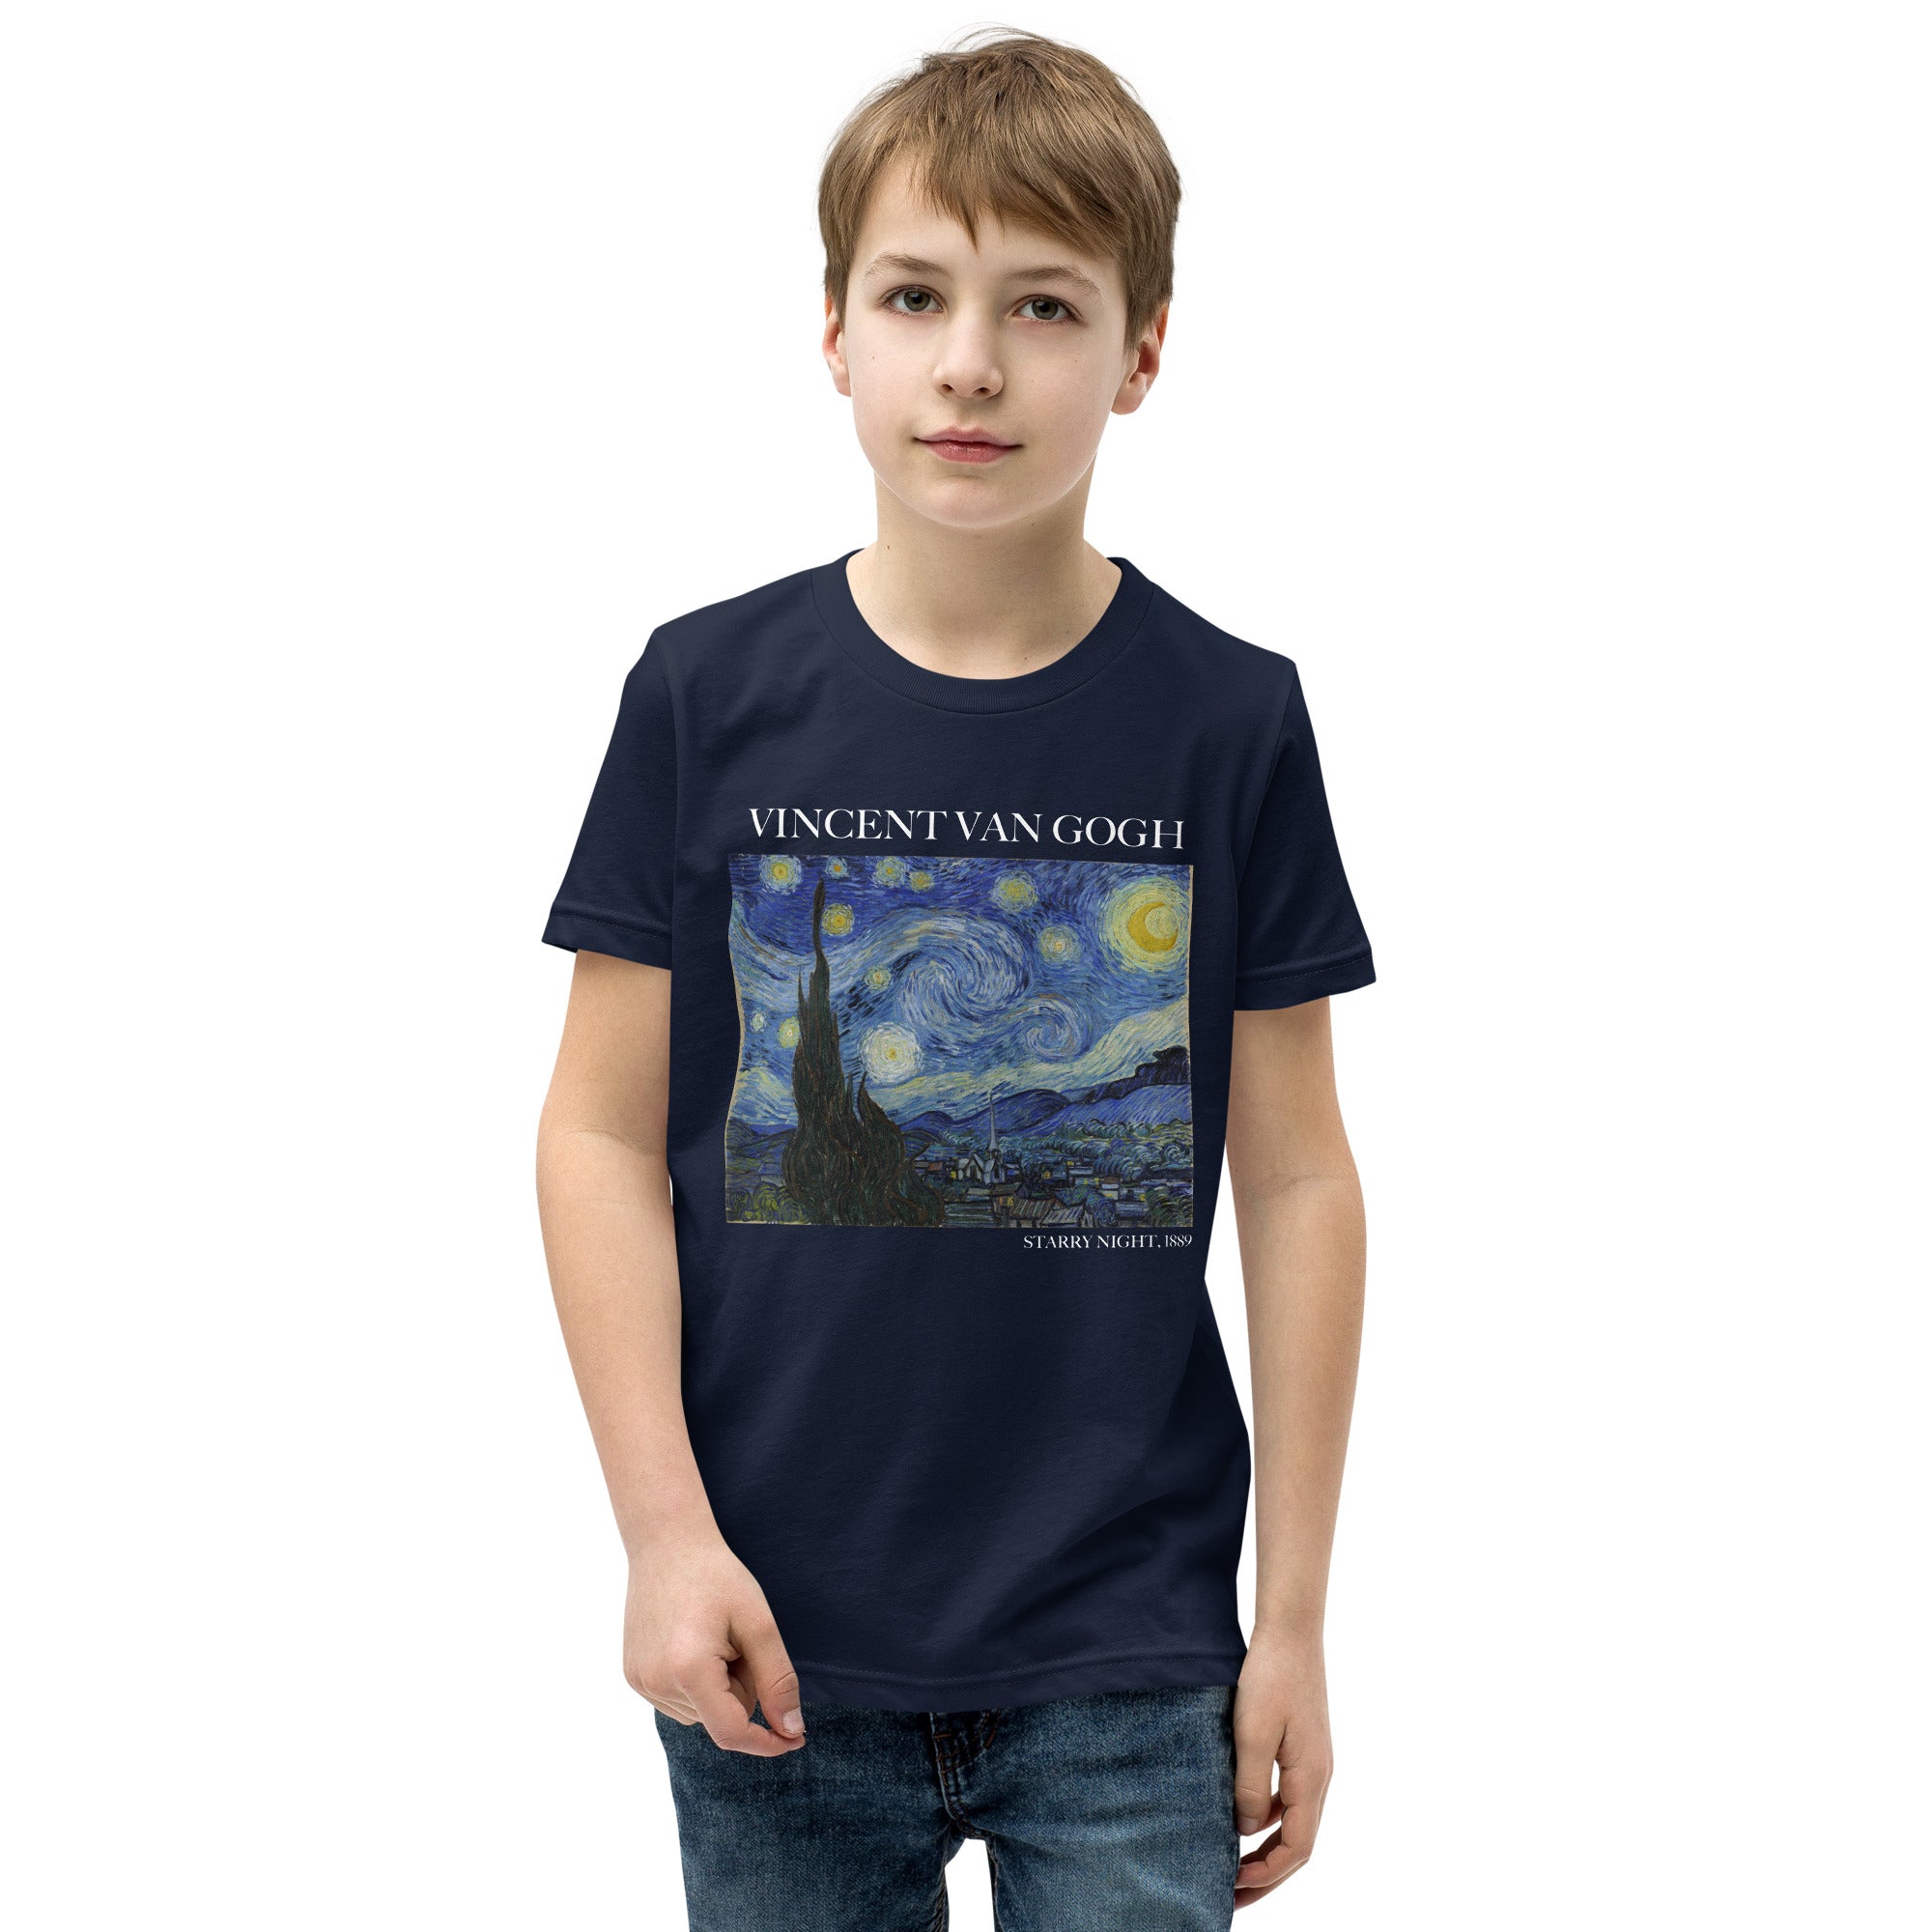 Vincent van Gogh 'Starry Night' Famous Painting Short Sleeve T-Shirt | Premium Youth Art Tee